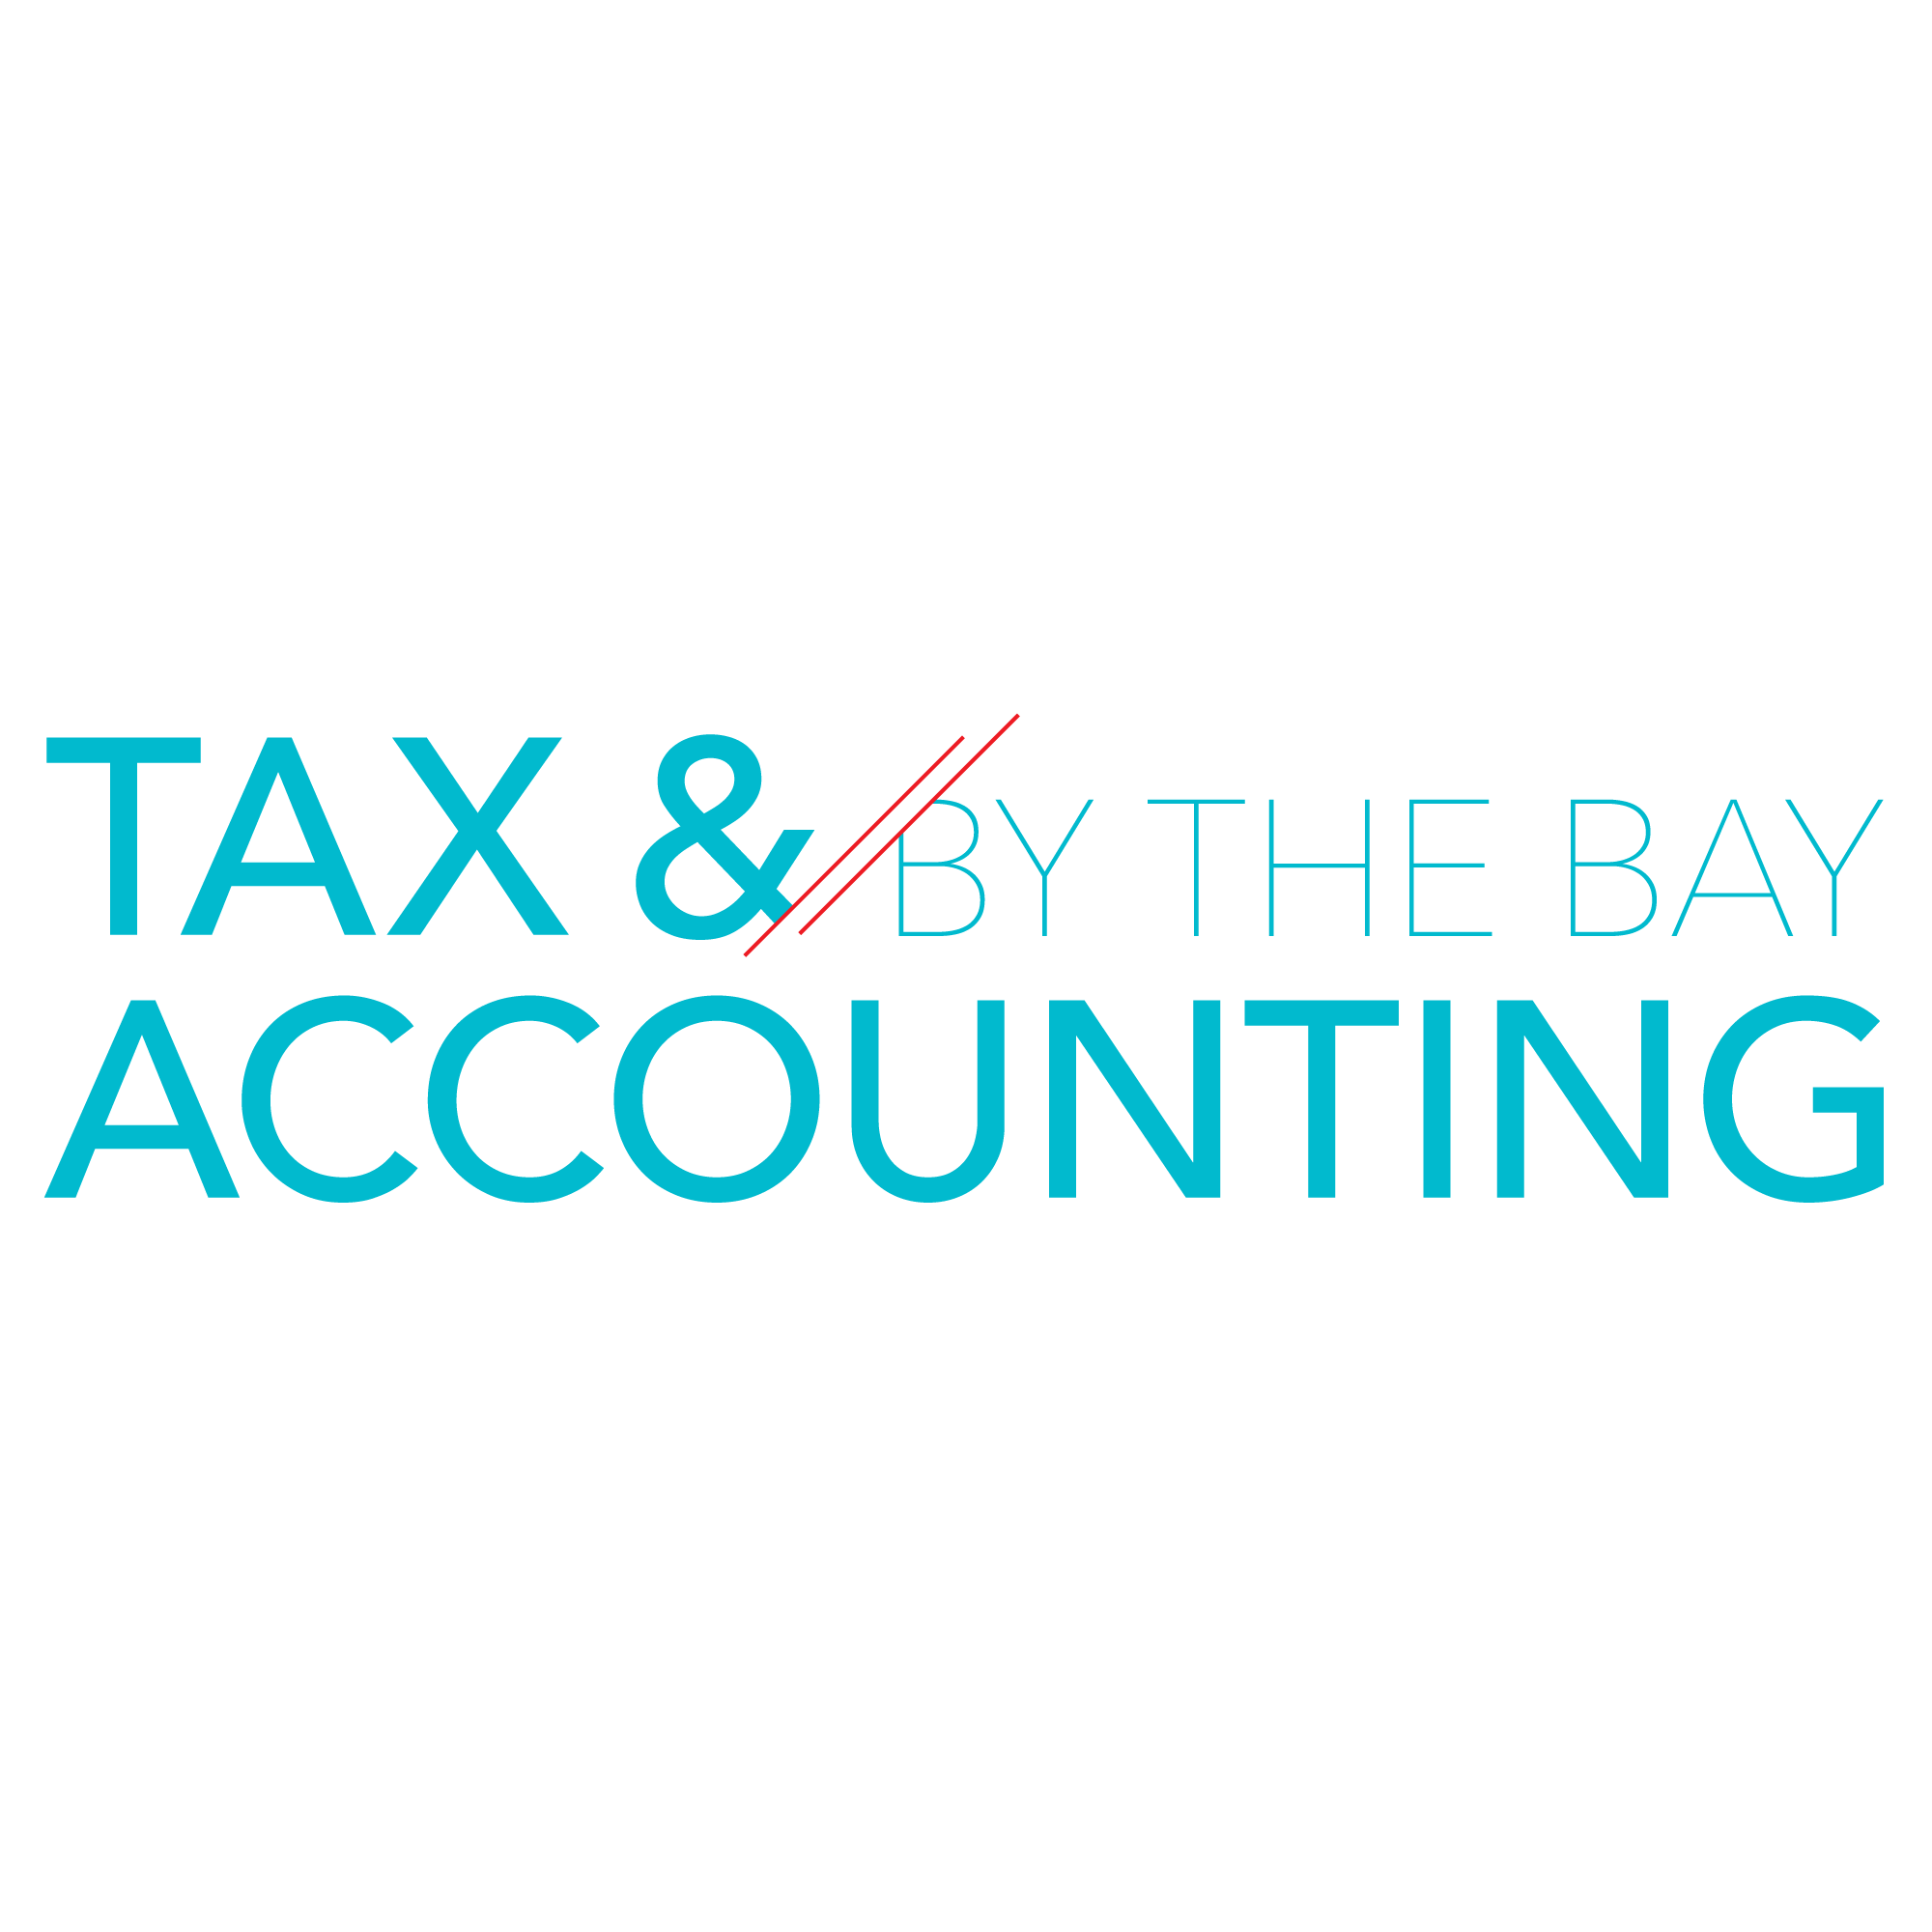 Tax & Accounting By The Bay Logo